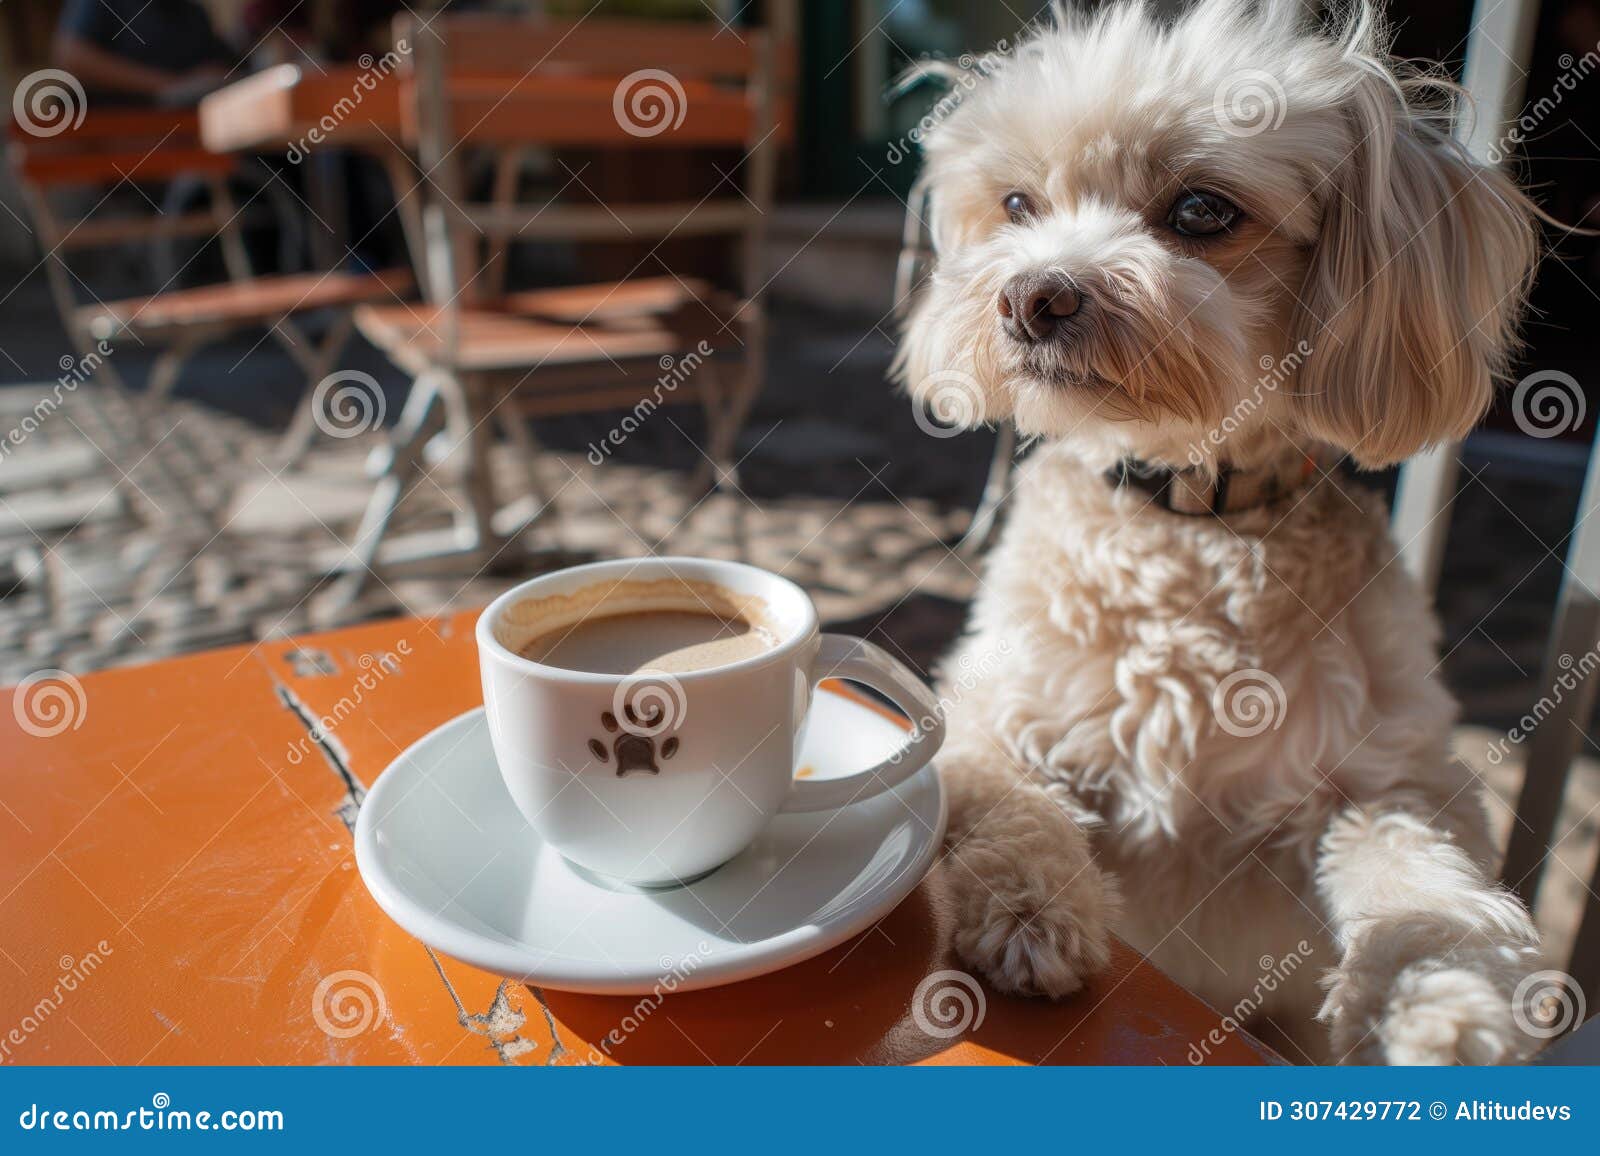 maltese with a decaf on a sunny cafe patio